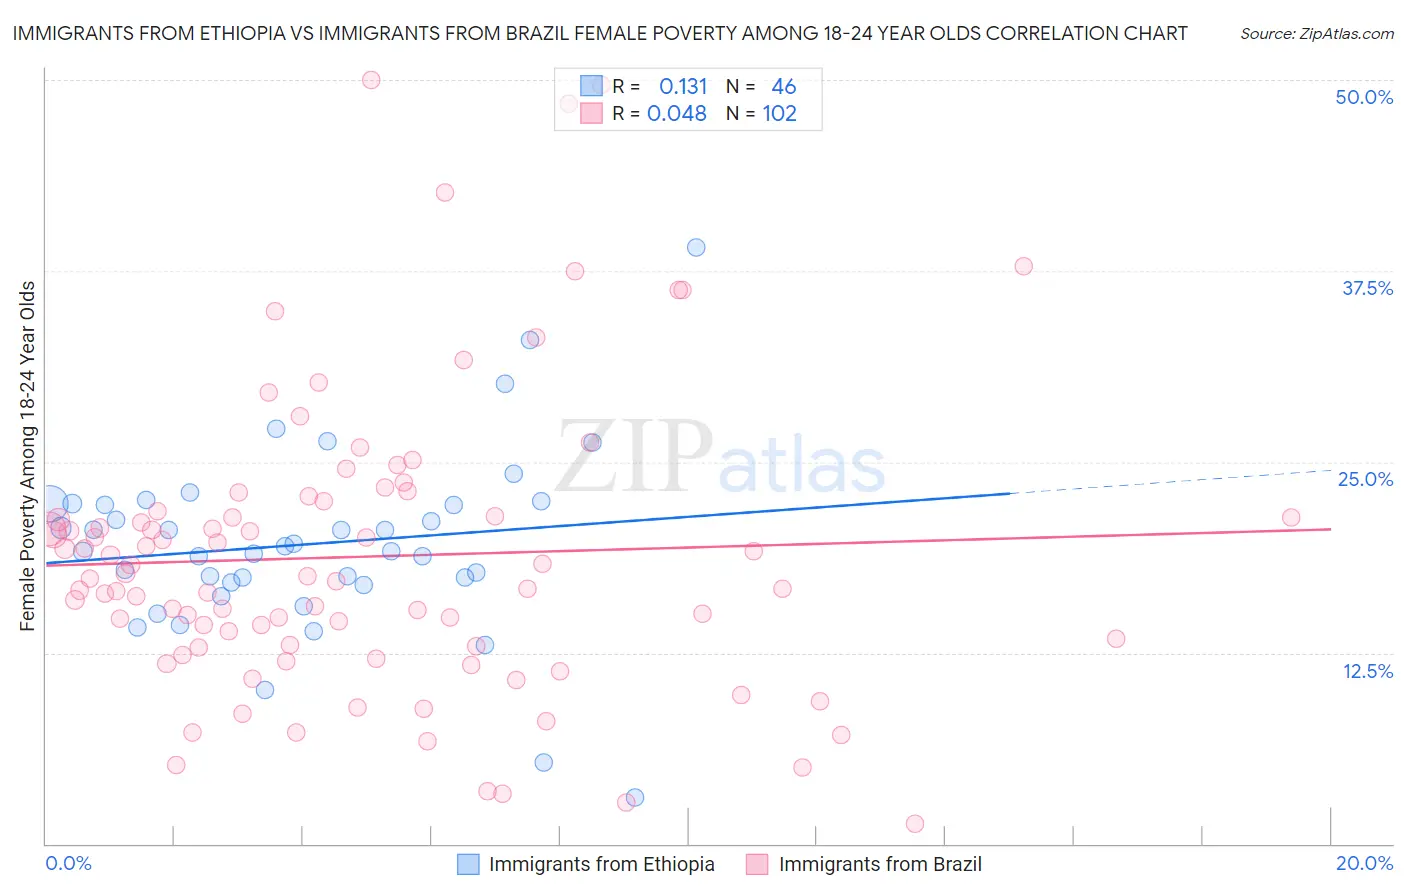 Immigrants from Ethiopia vs Immigrants from Brazil Female Poverty Among 18-24 Year Olds